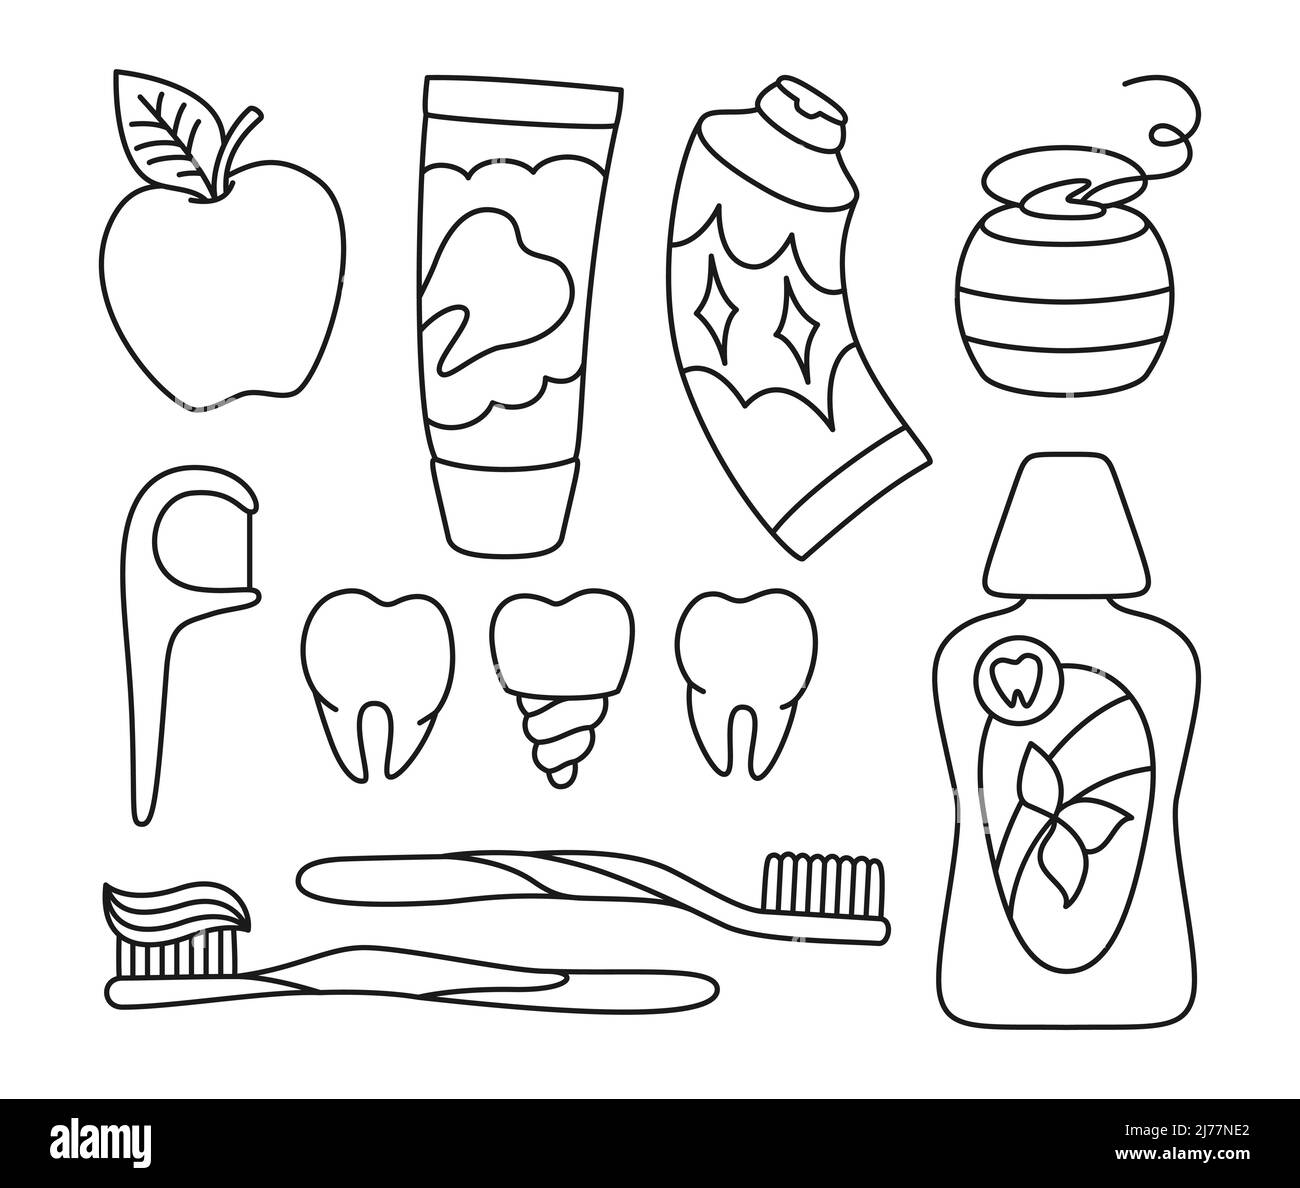 Dental tools sign set. Healthy tooth, dentistry implant, toothbrushes, toothpaste, dental floss, mouthwash. Mouth cleaning, healthcare oral hygiene line symbol, clean teeth. Orthodontic concept Stock Vector